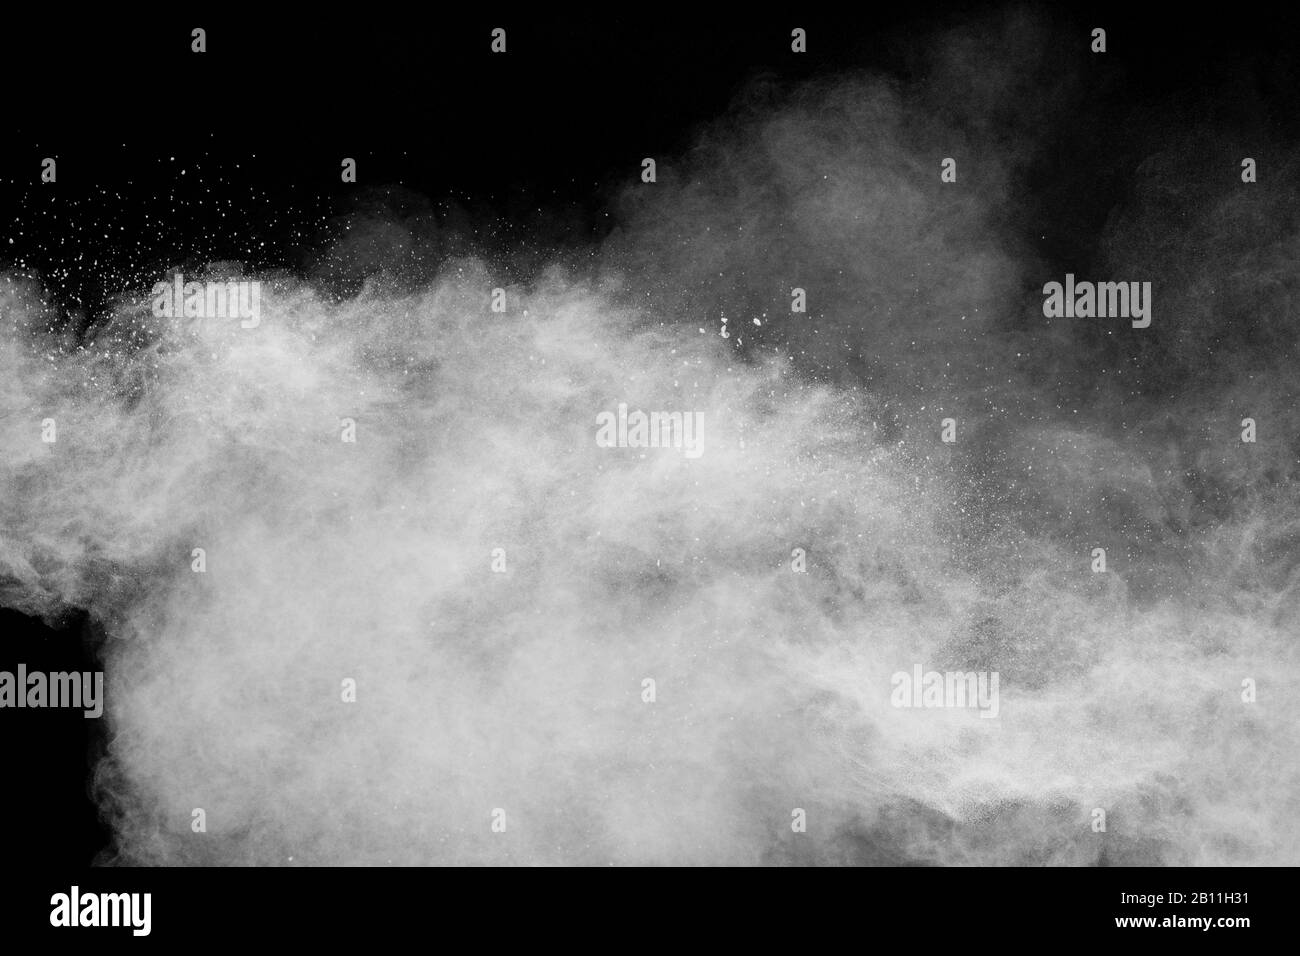 Freeze motion of white dust particles splash on black background.White powder explosion clouds. Stock Photo